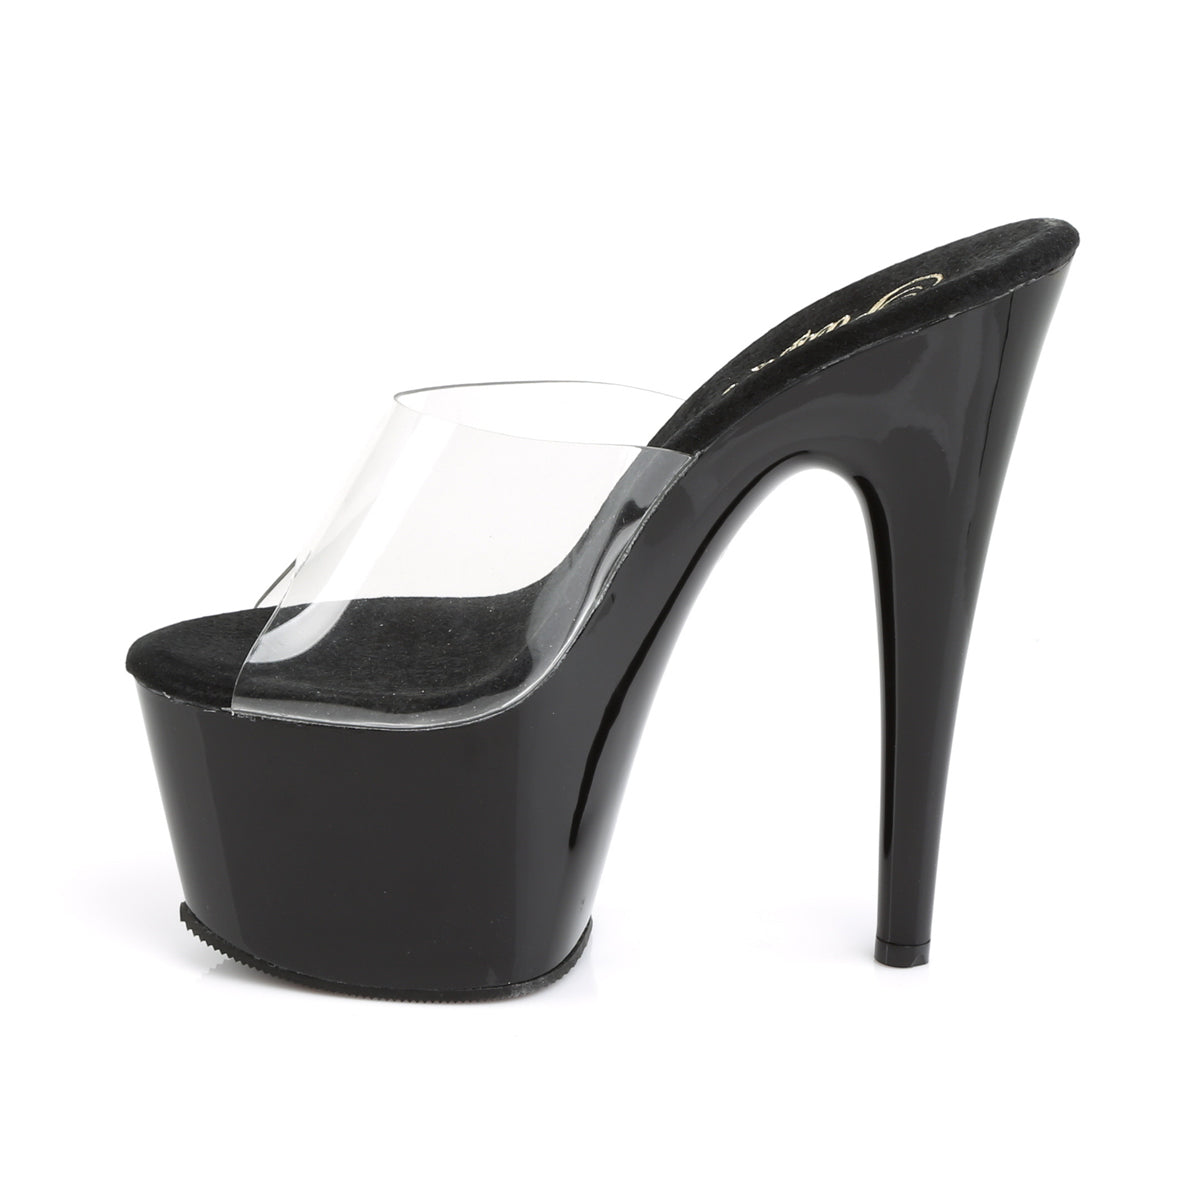 ADORE-701/C/B 7" PLEASER FAST DELIVERY 24-48h